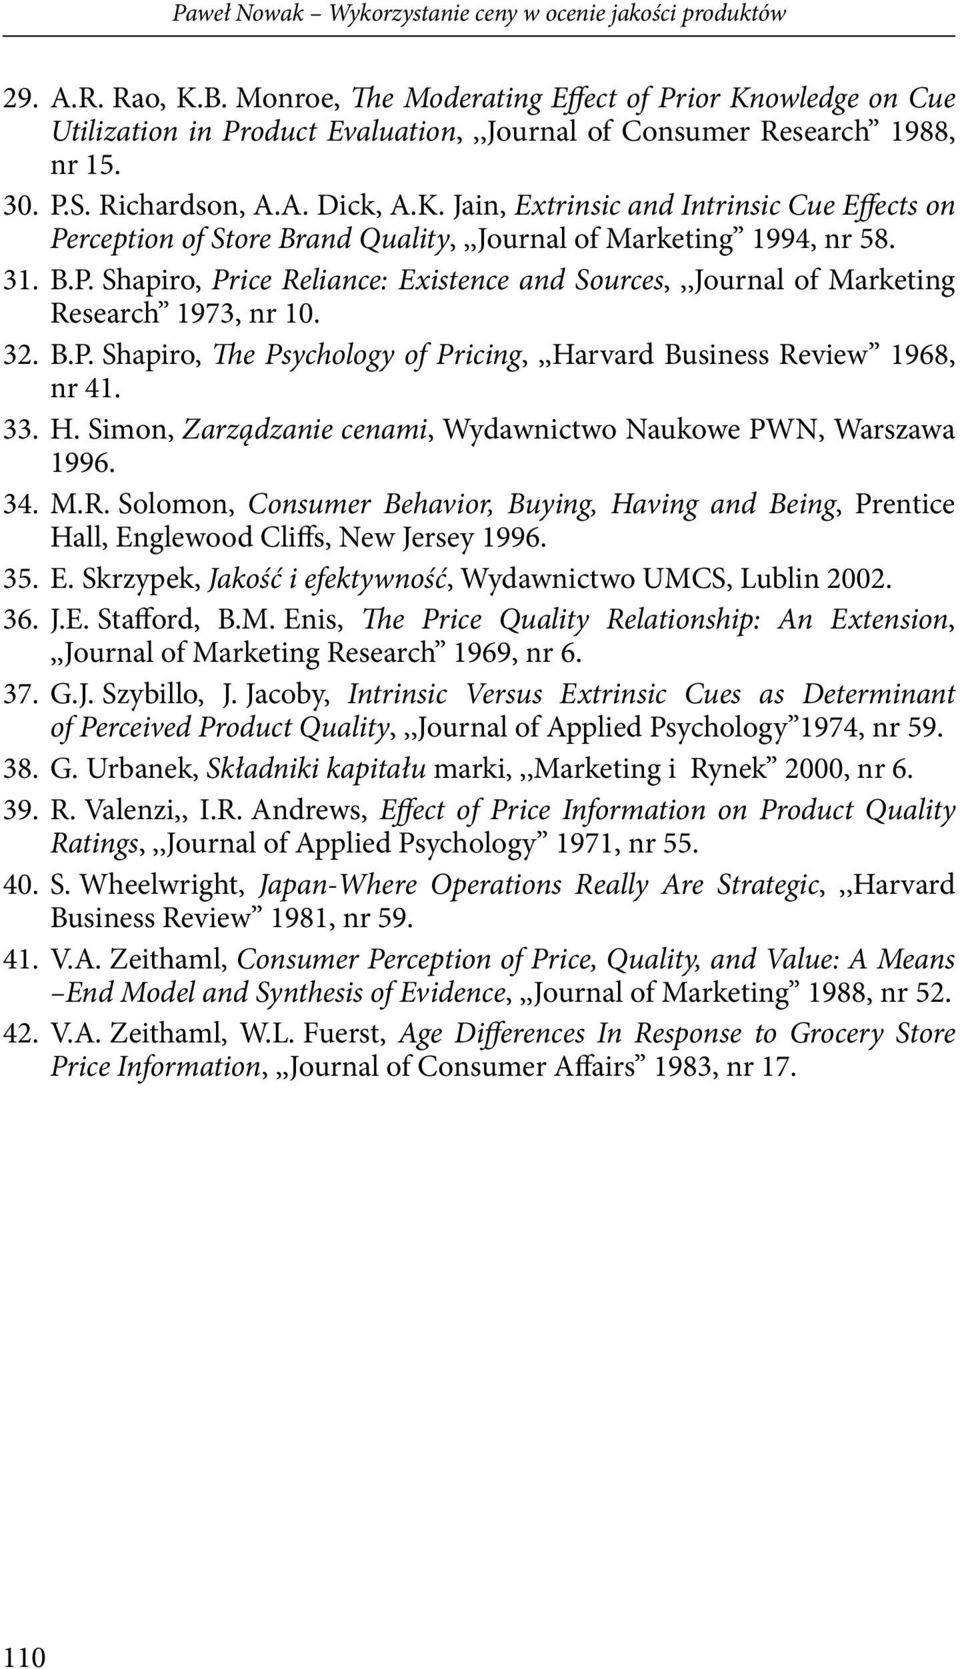 31. B.P. Shapiro, Price Reliance: Existence and Sources,,,Journal of Marketing Research 1973, nr 10. 32. B.P. Shapiro, The Psychology of Pricing,,,Harvard Business Review 1968, nr 41. 33. H.